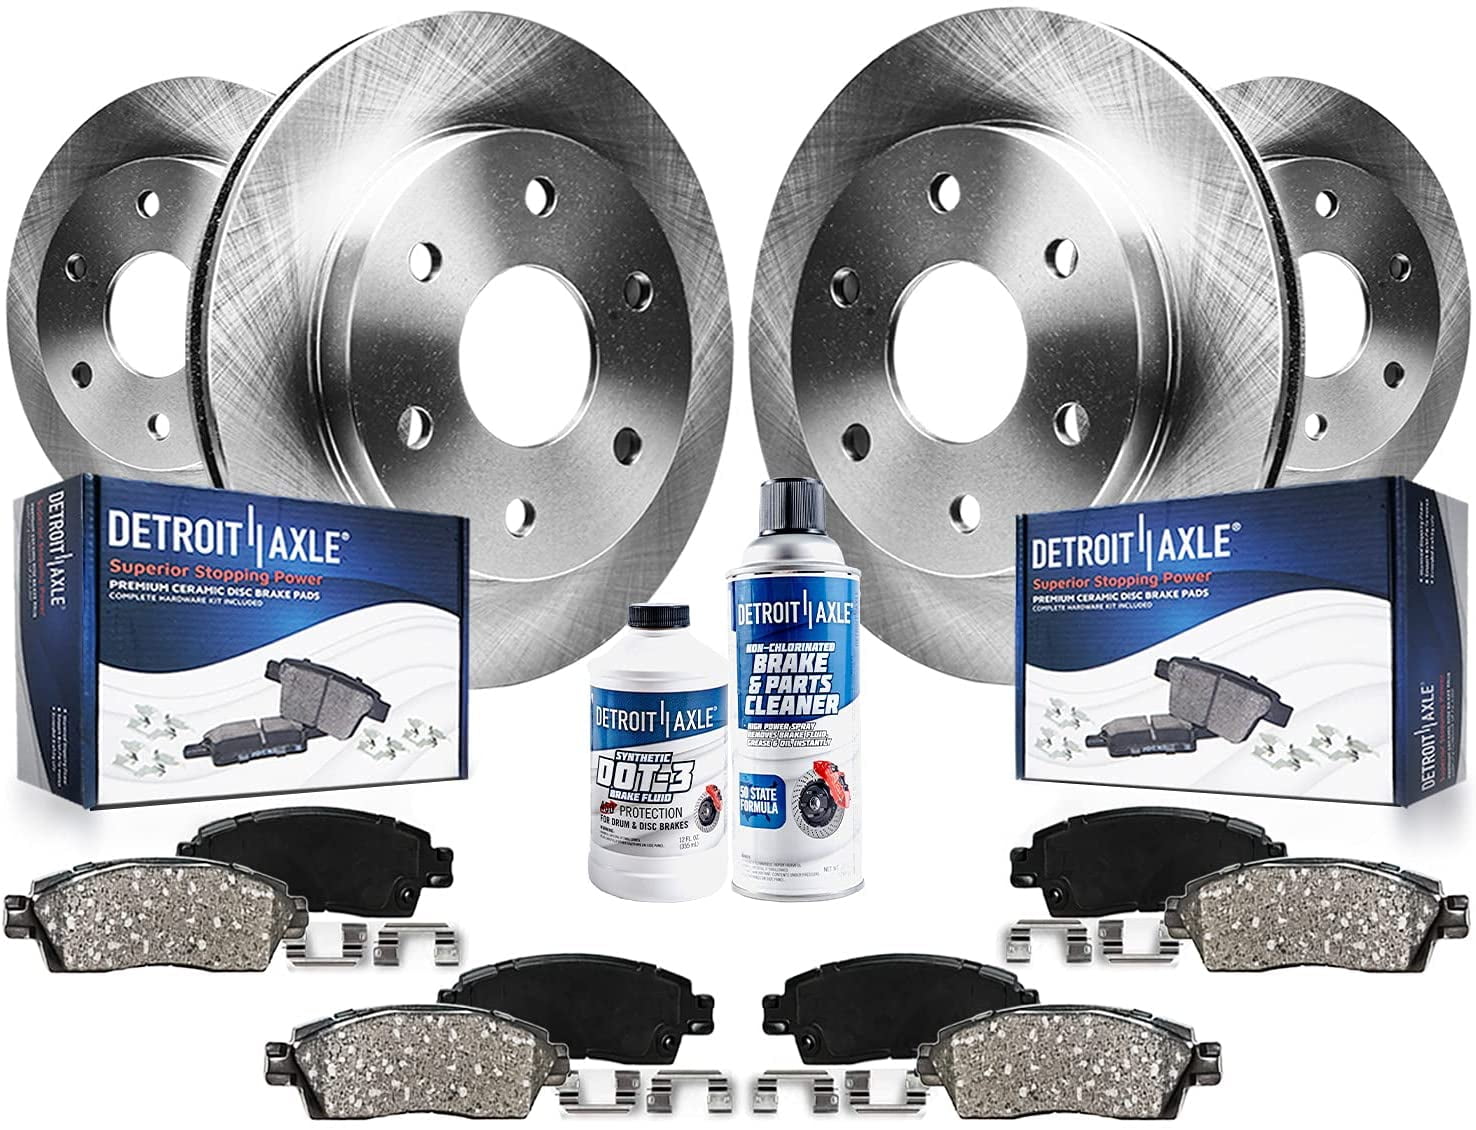 Rotors Ceramic Pads R 2011 2012 Fits Nissan Pathfinder OE Replacement